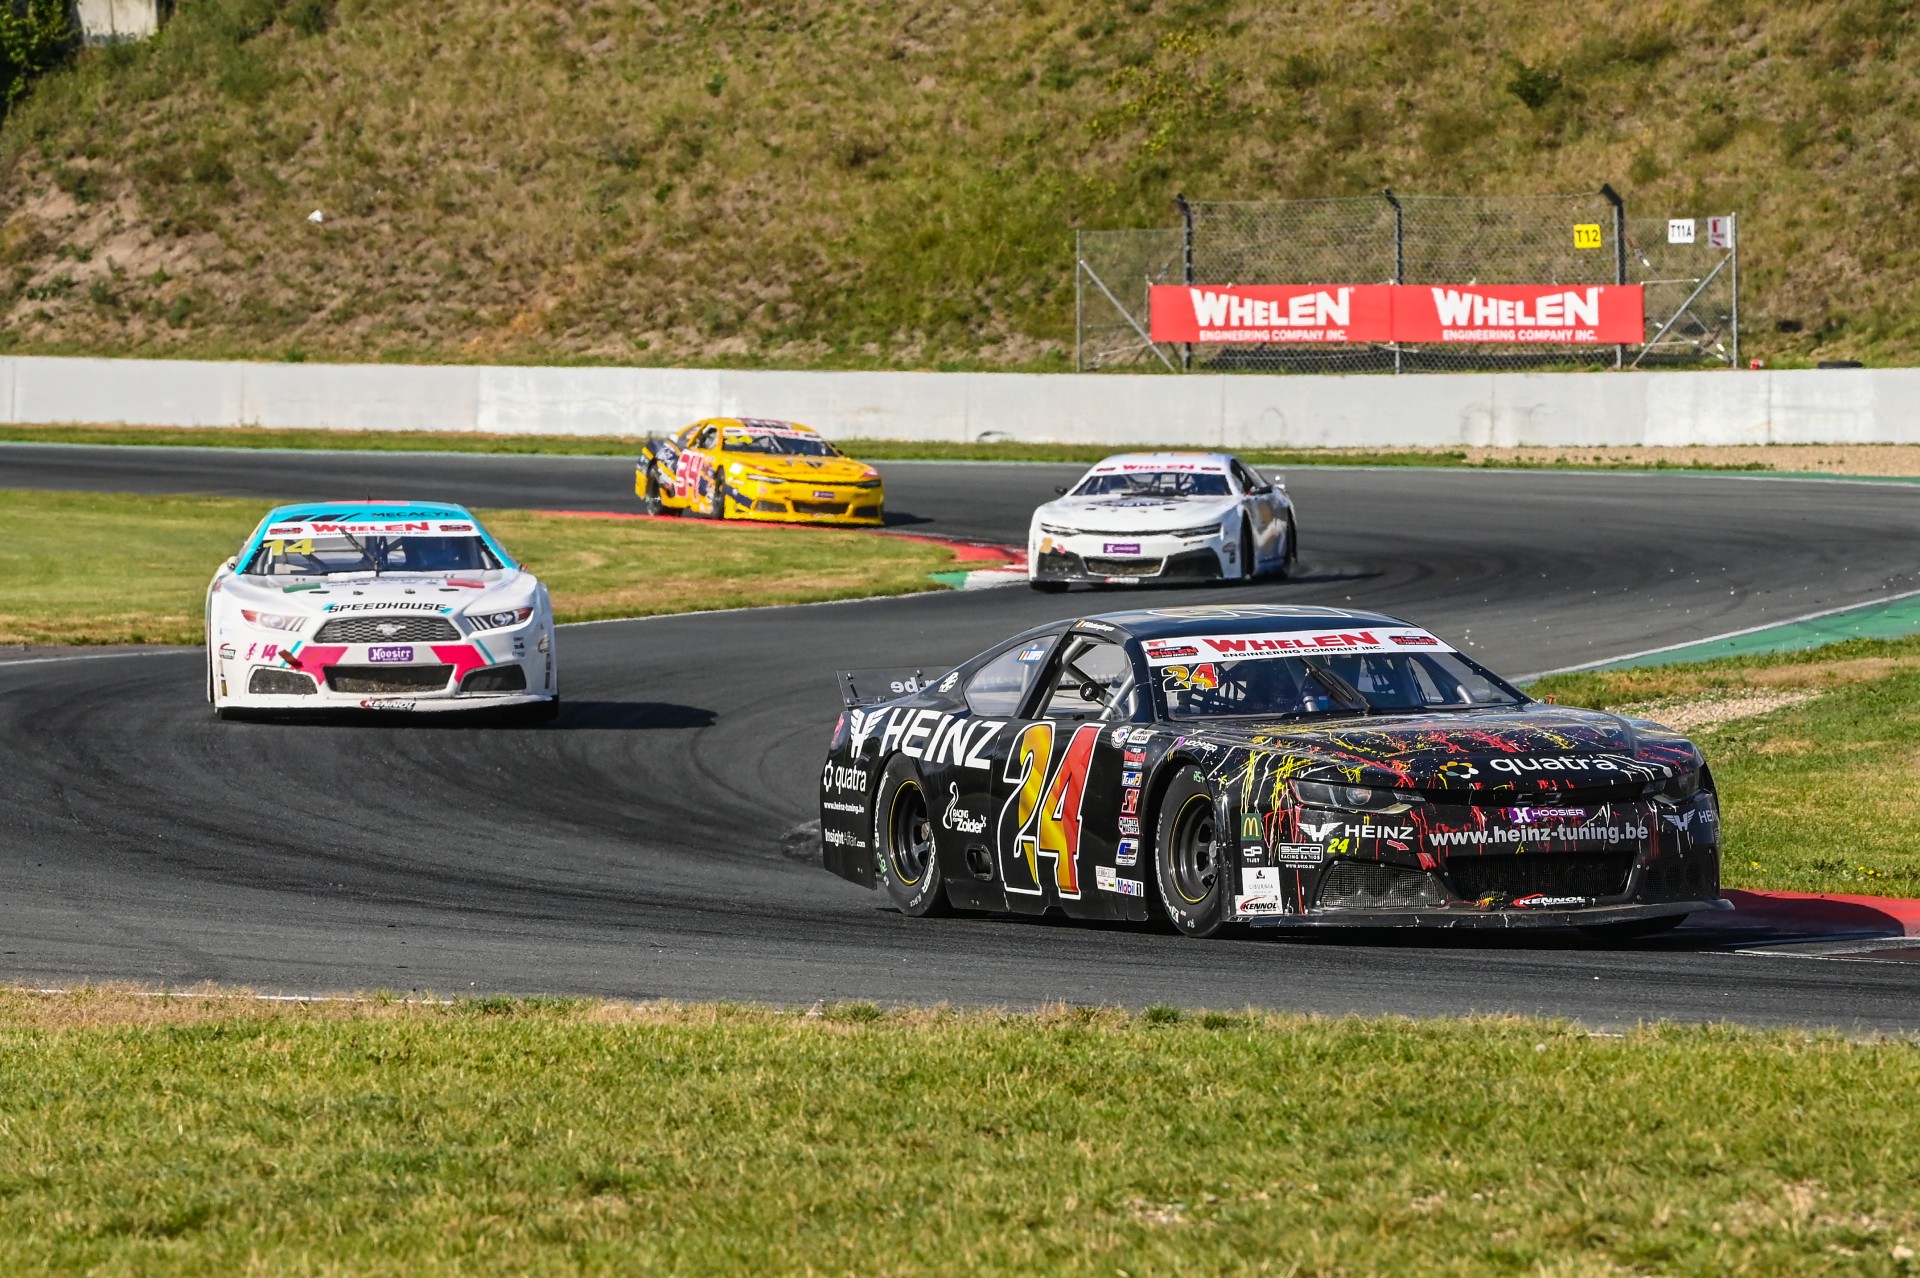 EuroNASCAR 2: situation after races 1 and 2 of the German GP